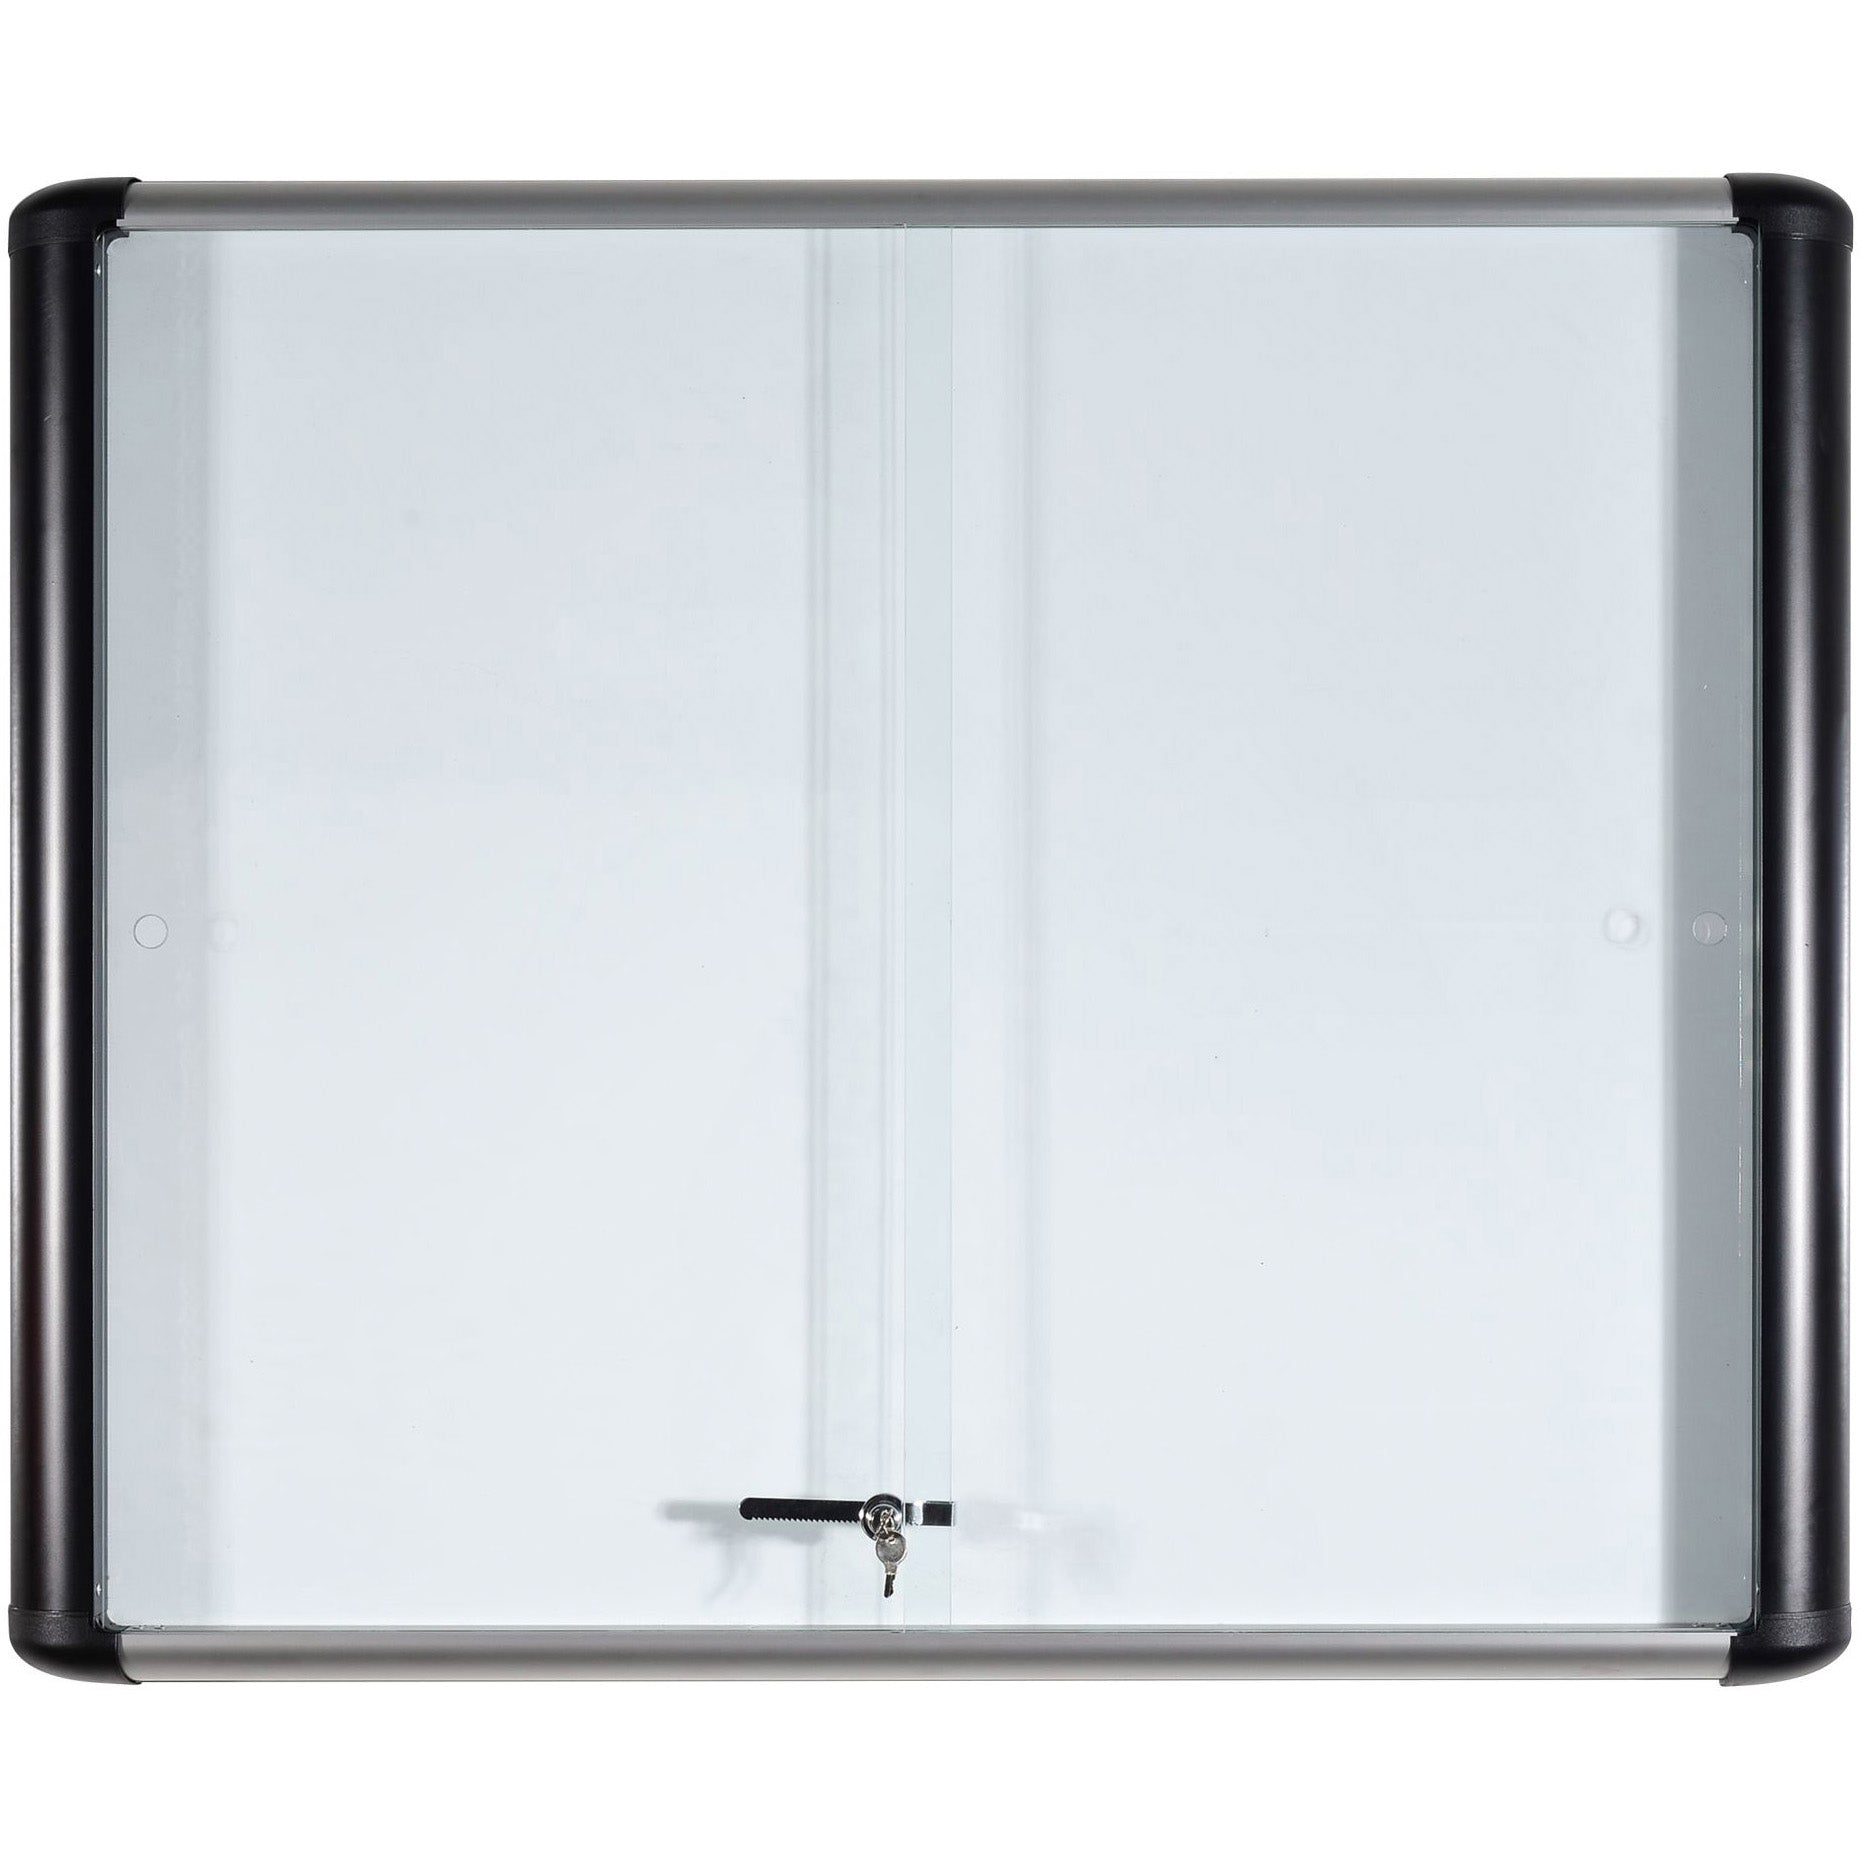 VT640109630 Enclosed Locking Sliding Doors Magnetic Dry Erase Board, Wall Mounting Commerial Whiteboard, 39" x 46", Aluminum Frame by MasterVision